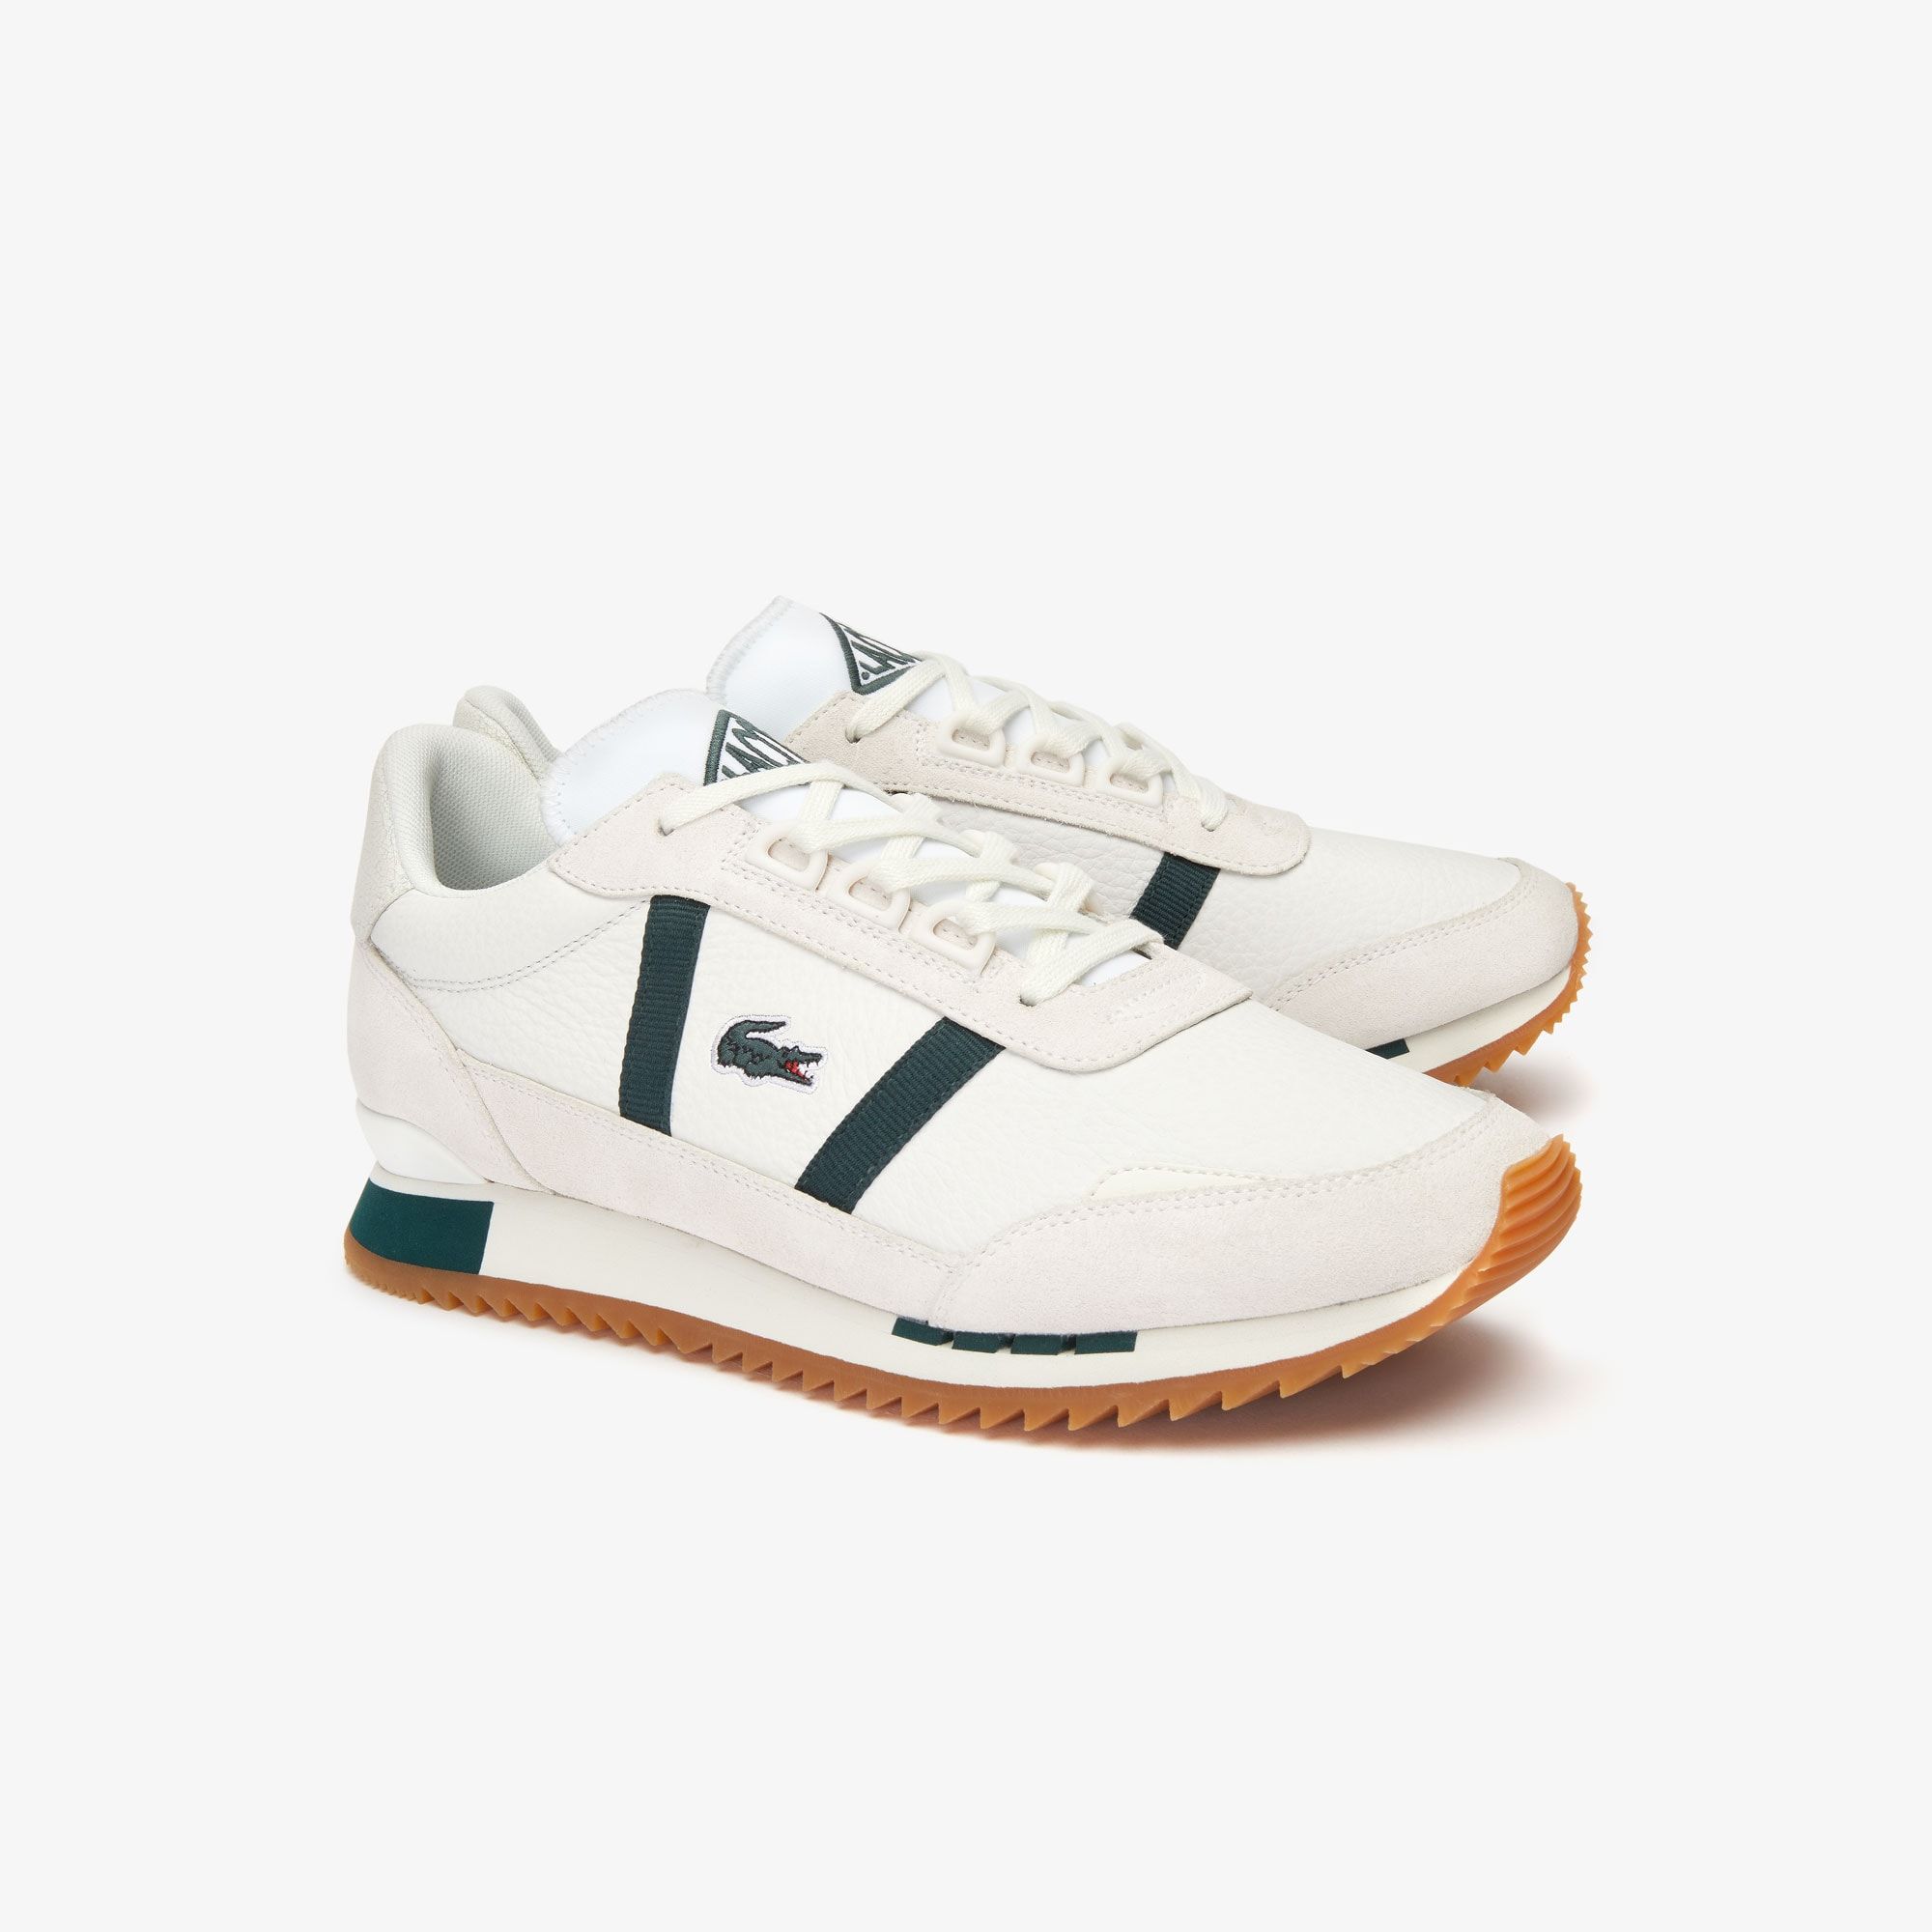 lacoste womens trainers sale